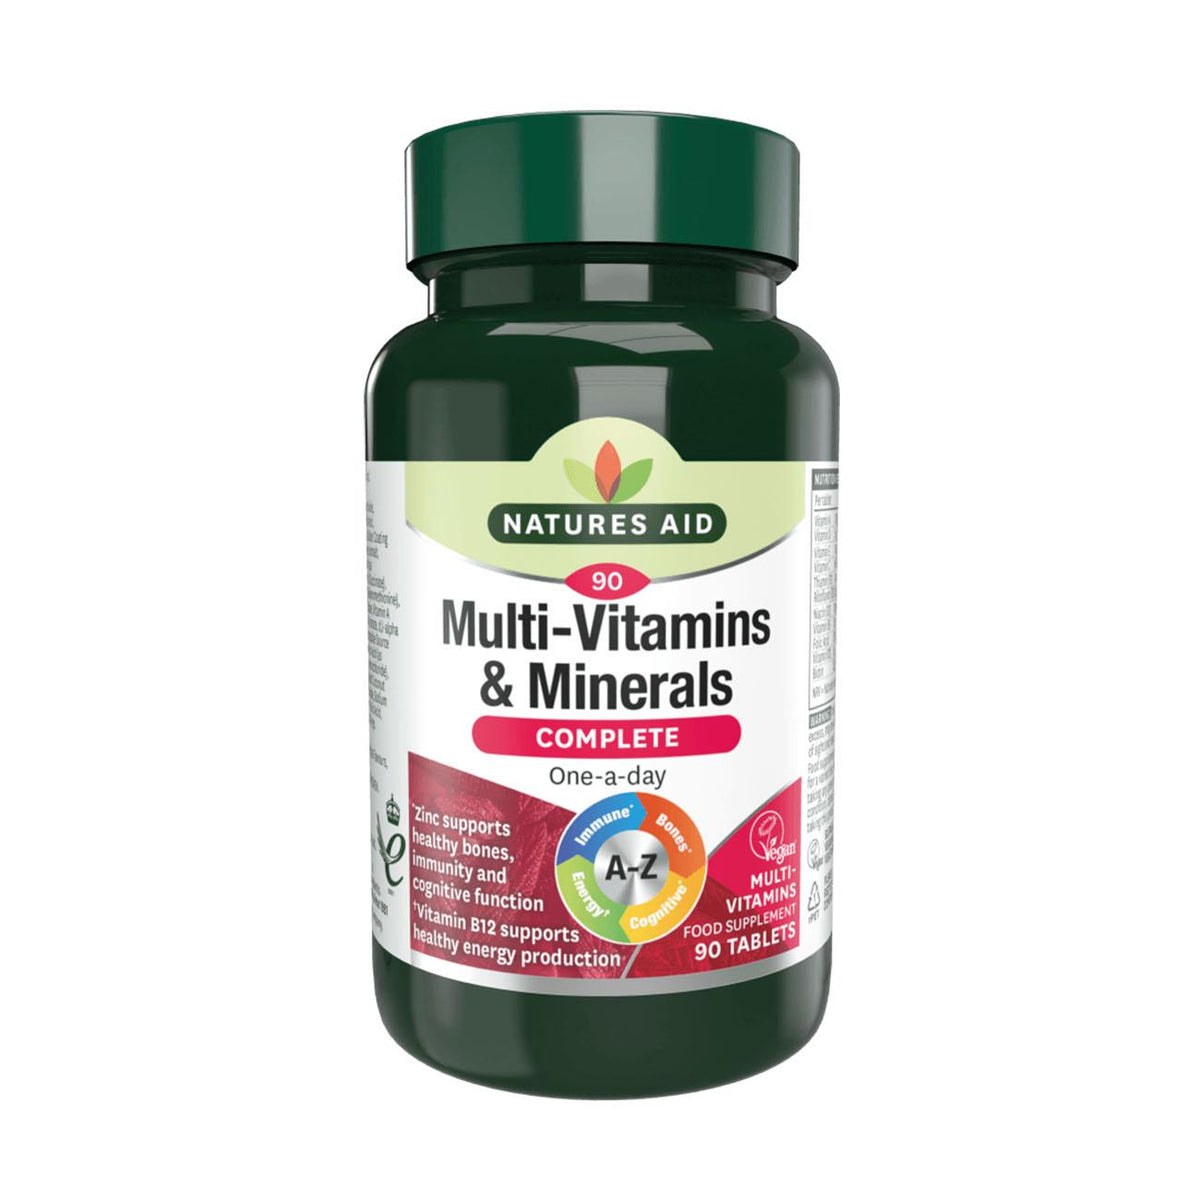 Swiss Natural Total One Maternity Multi Vitamin & Mineral 90